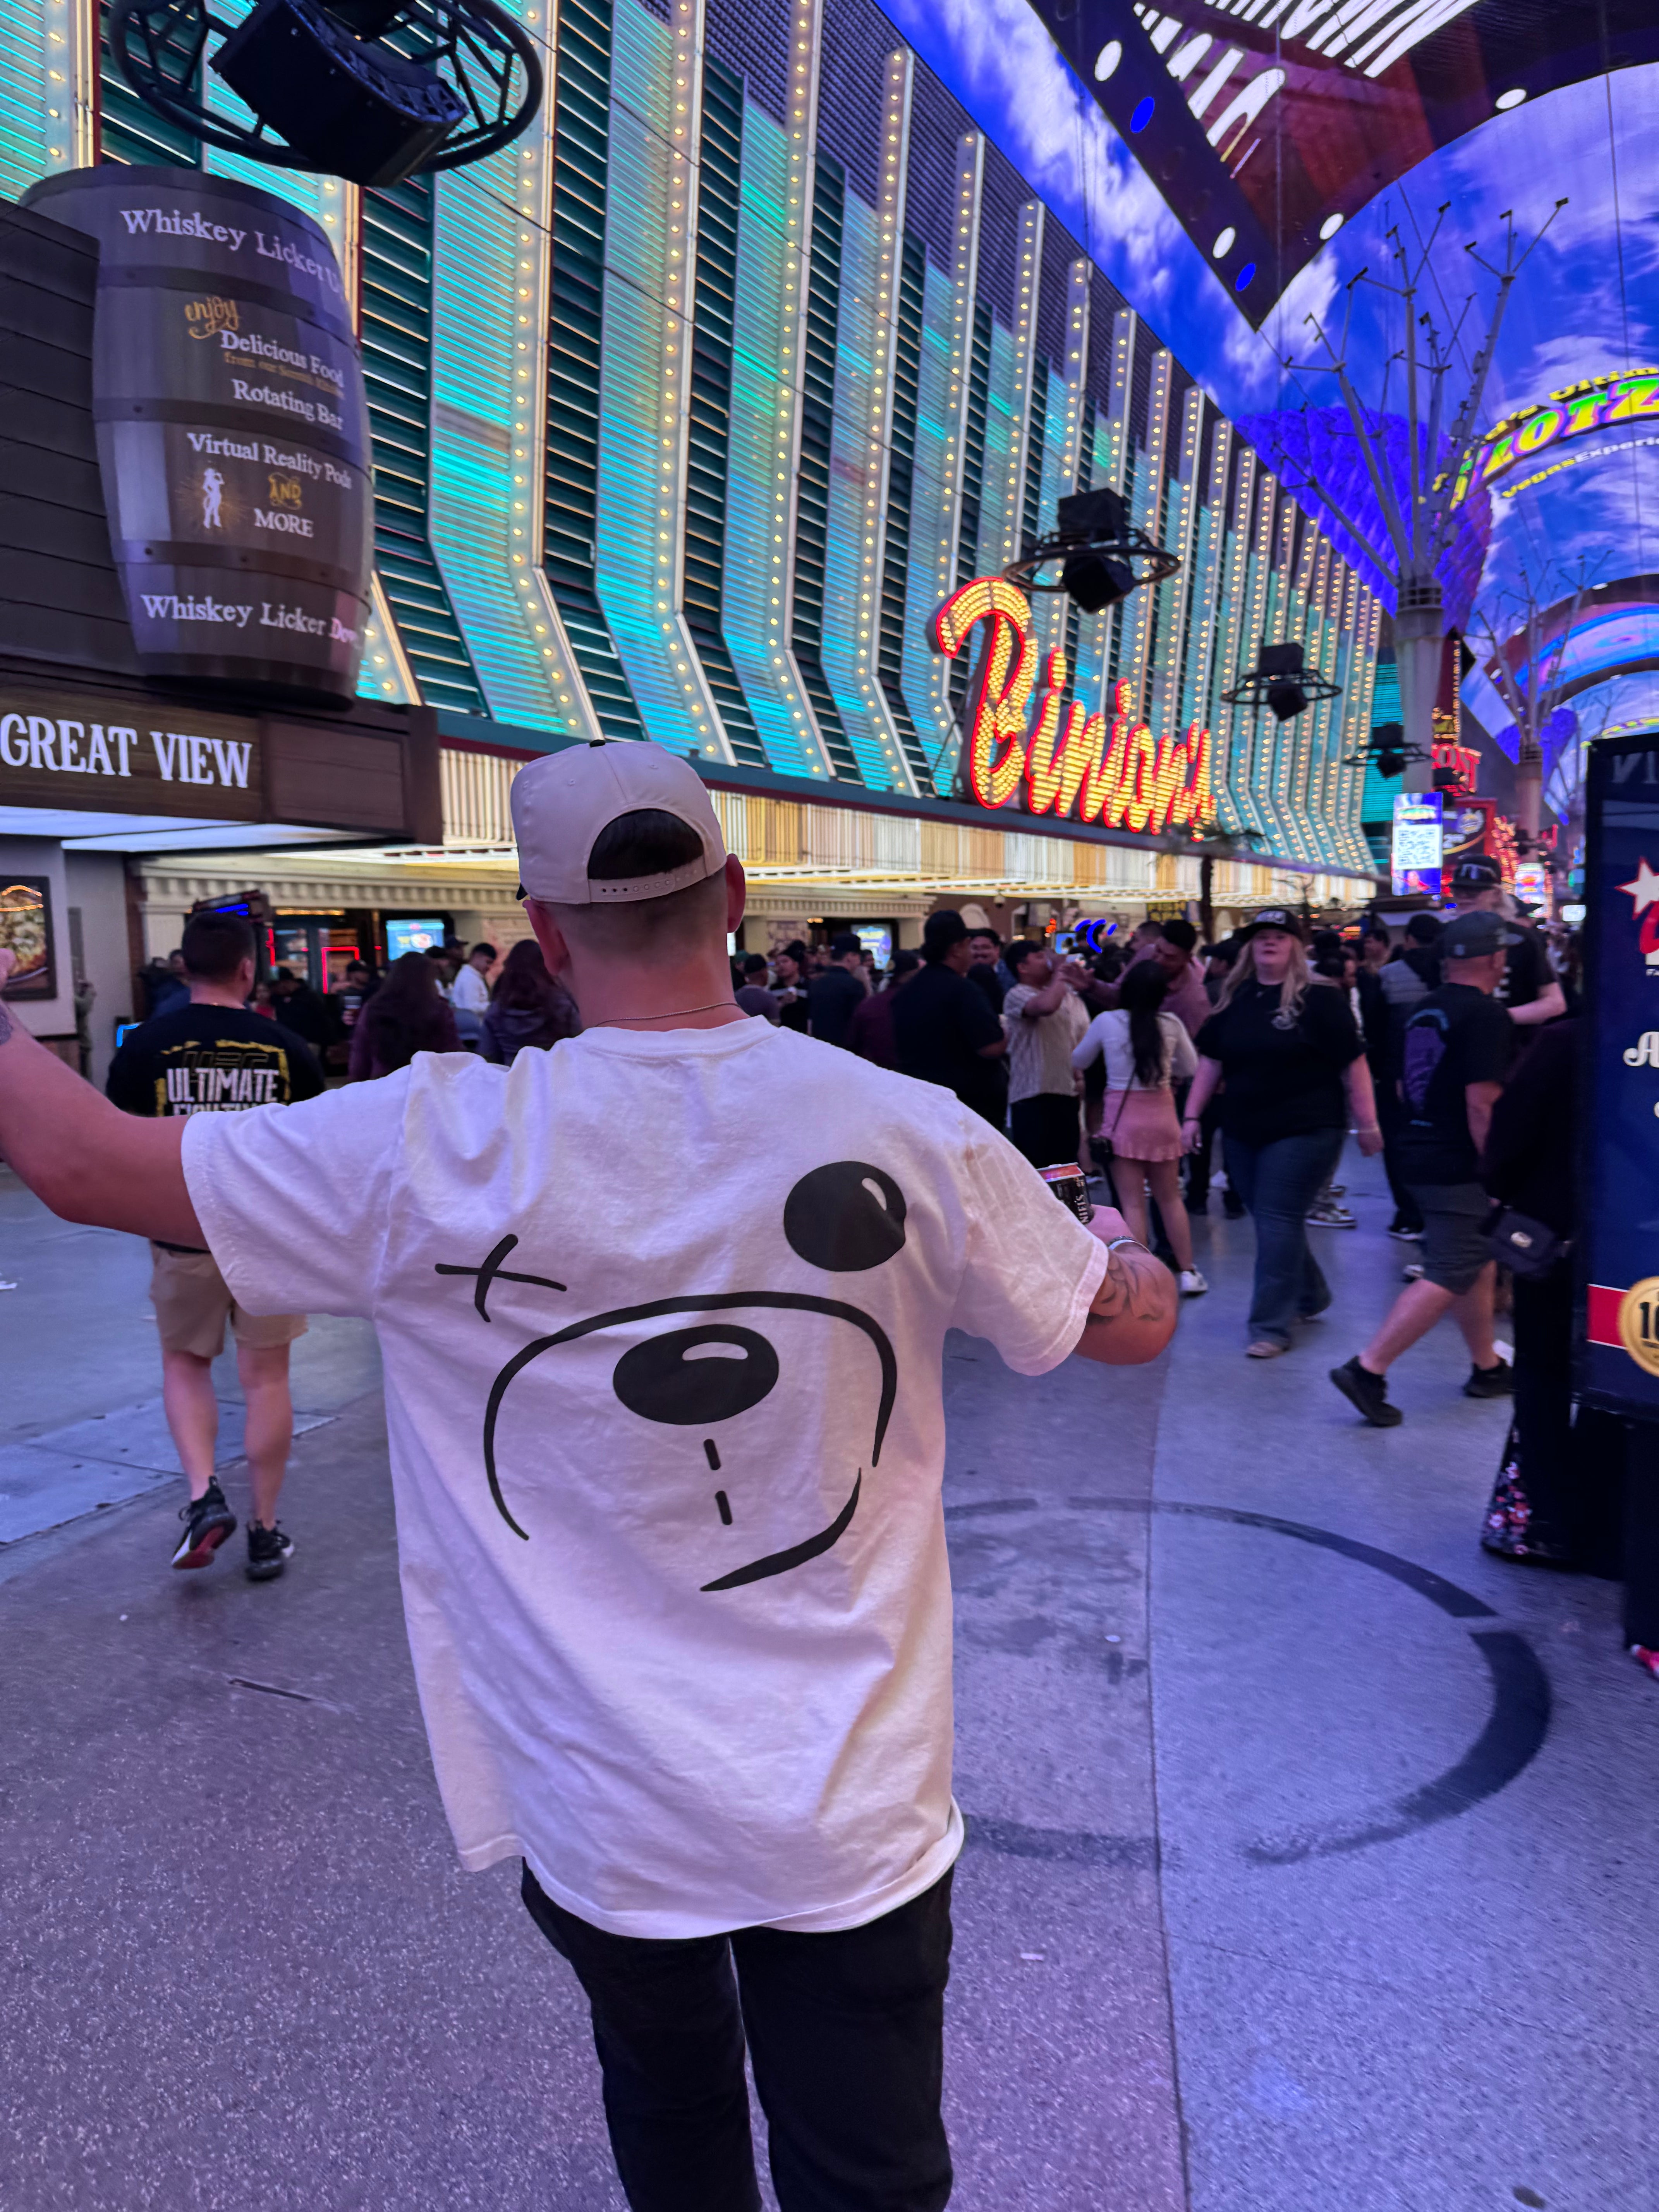 A person wearing a white **Better not Bear Face Tee** raises one arm while walking on a busy, illuminated street in the city. The 100% cotton, unisex shirt stands out amid the bustling crowd and various signs visible in the background.